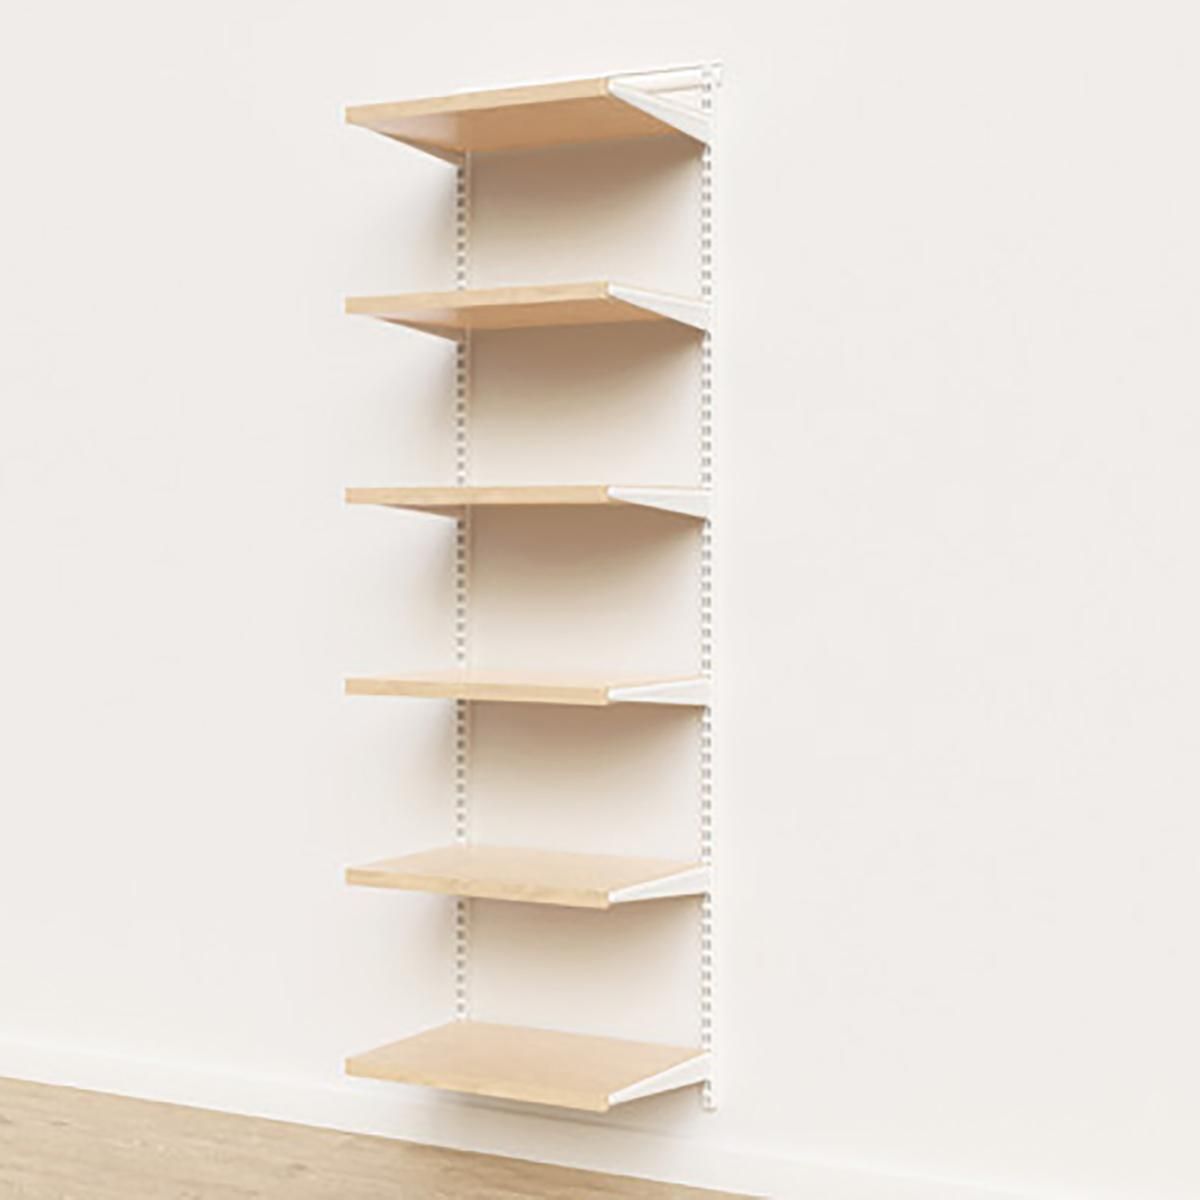 Elfa Décor 2' White & Birch Basic Shelving Units for Anywhere | The Container Store